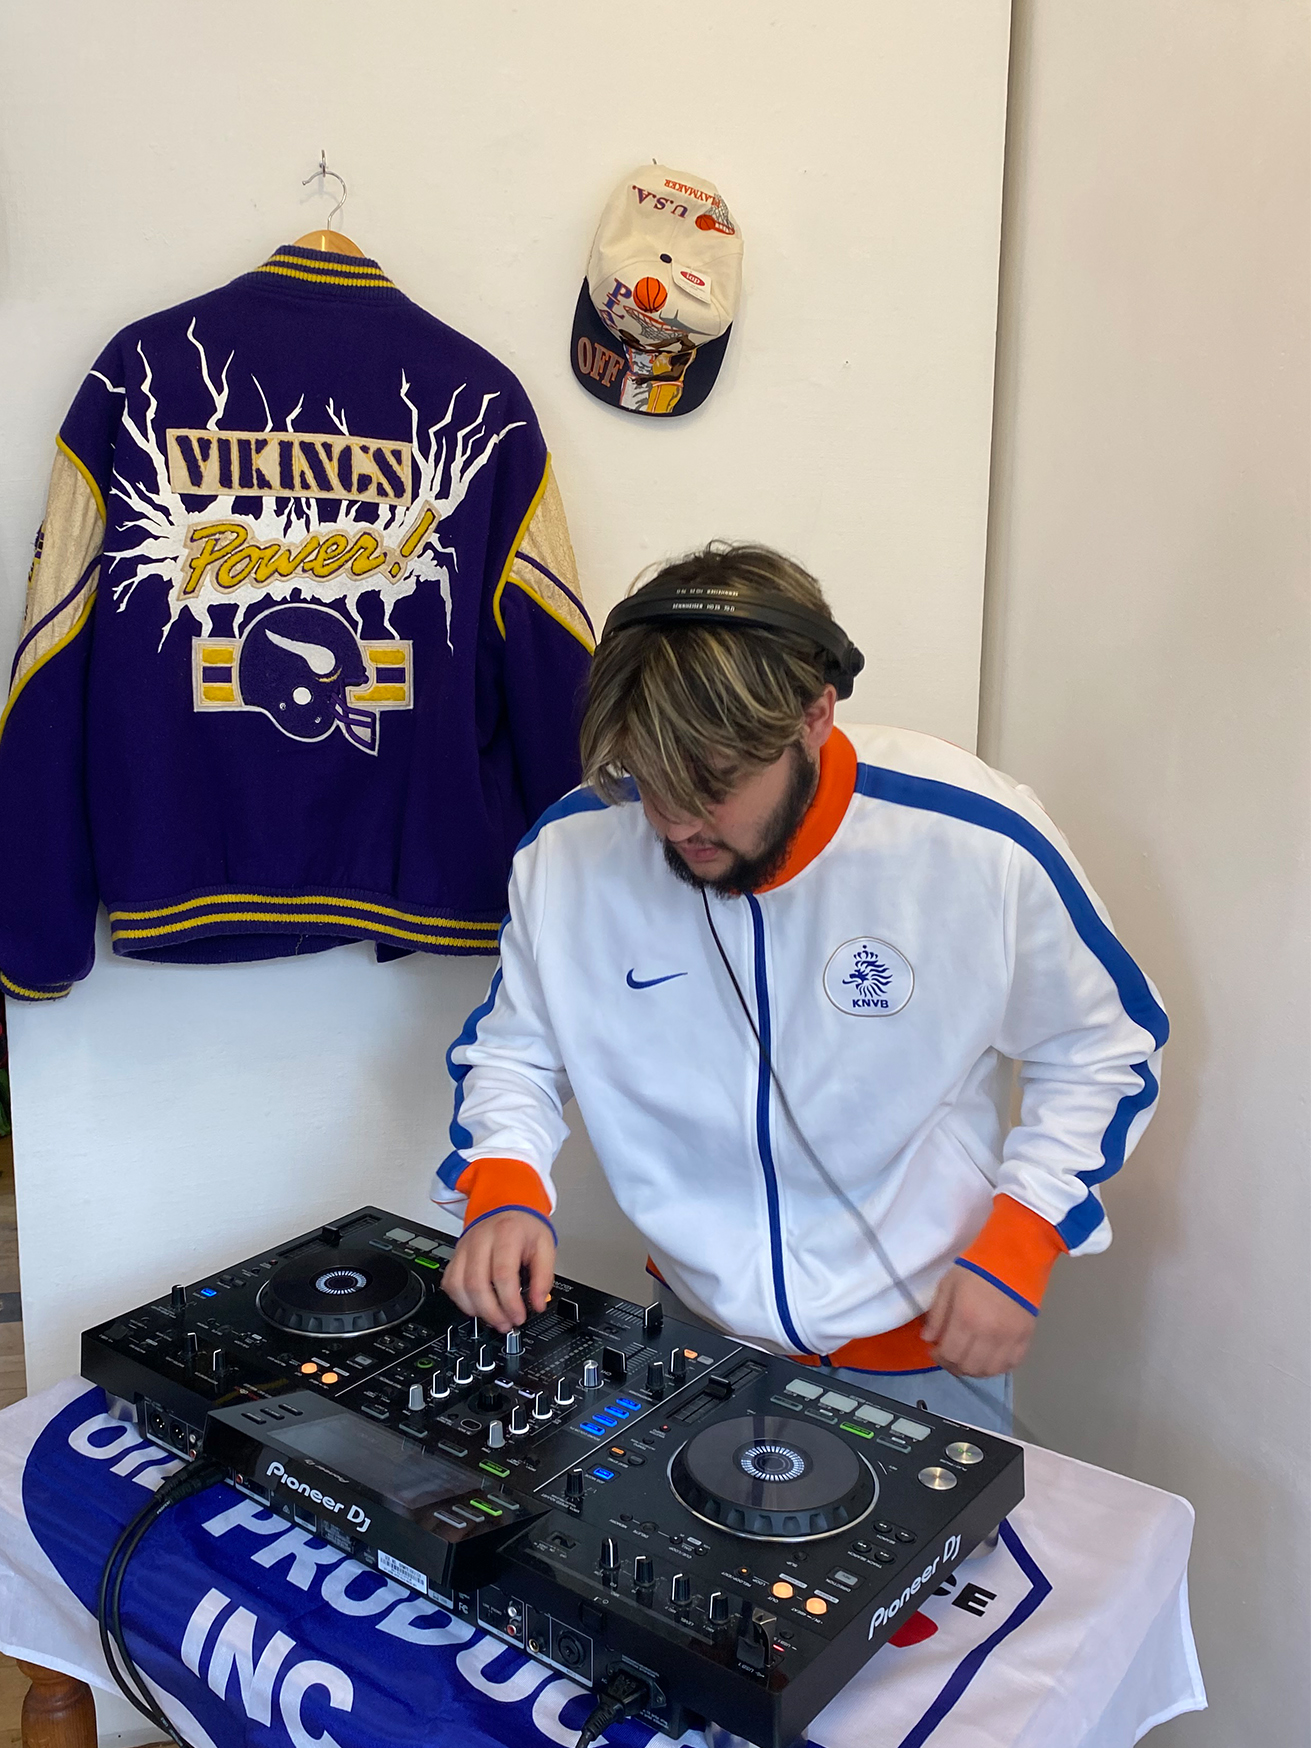 Photo of someone using a DJ deck in the corner of a room, wearing sportwear and with sportswear hung on the wall behind